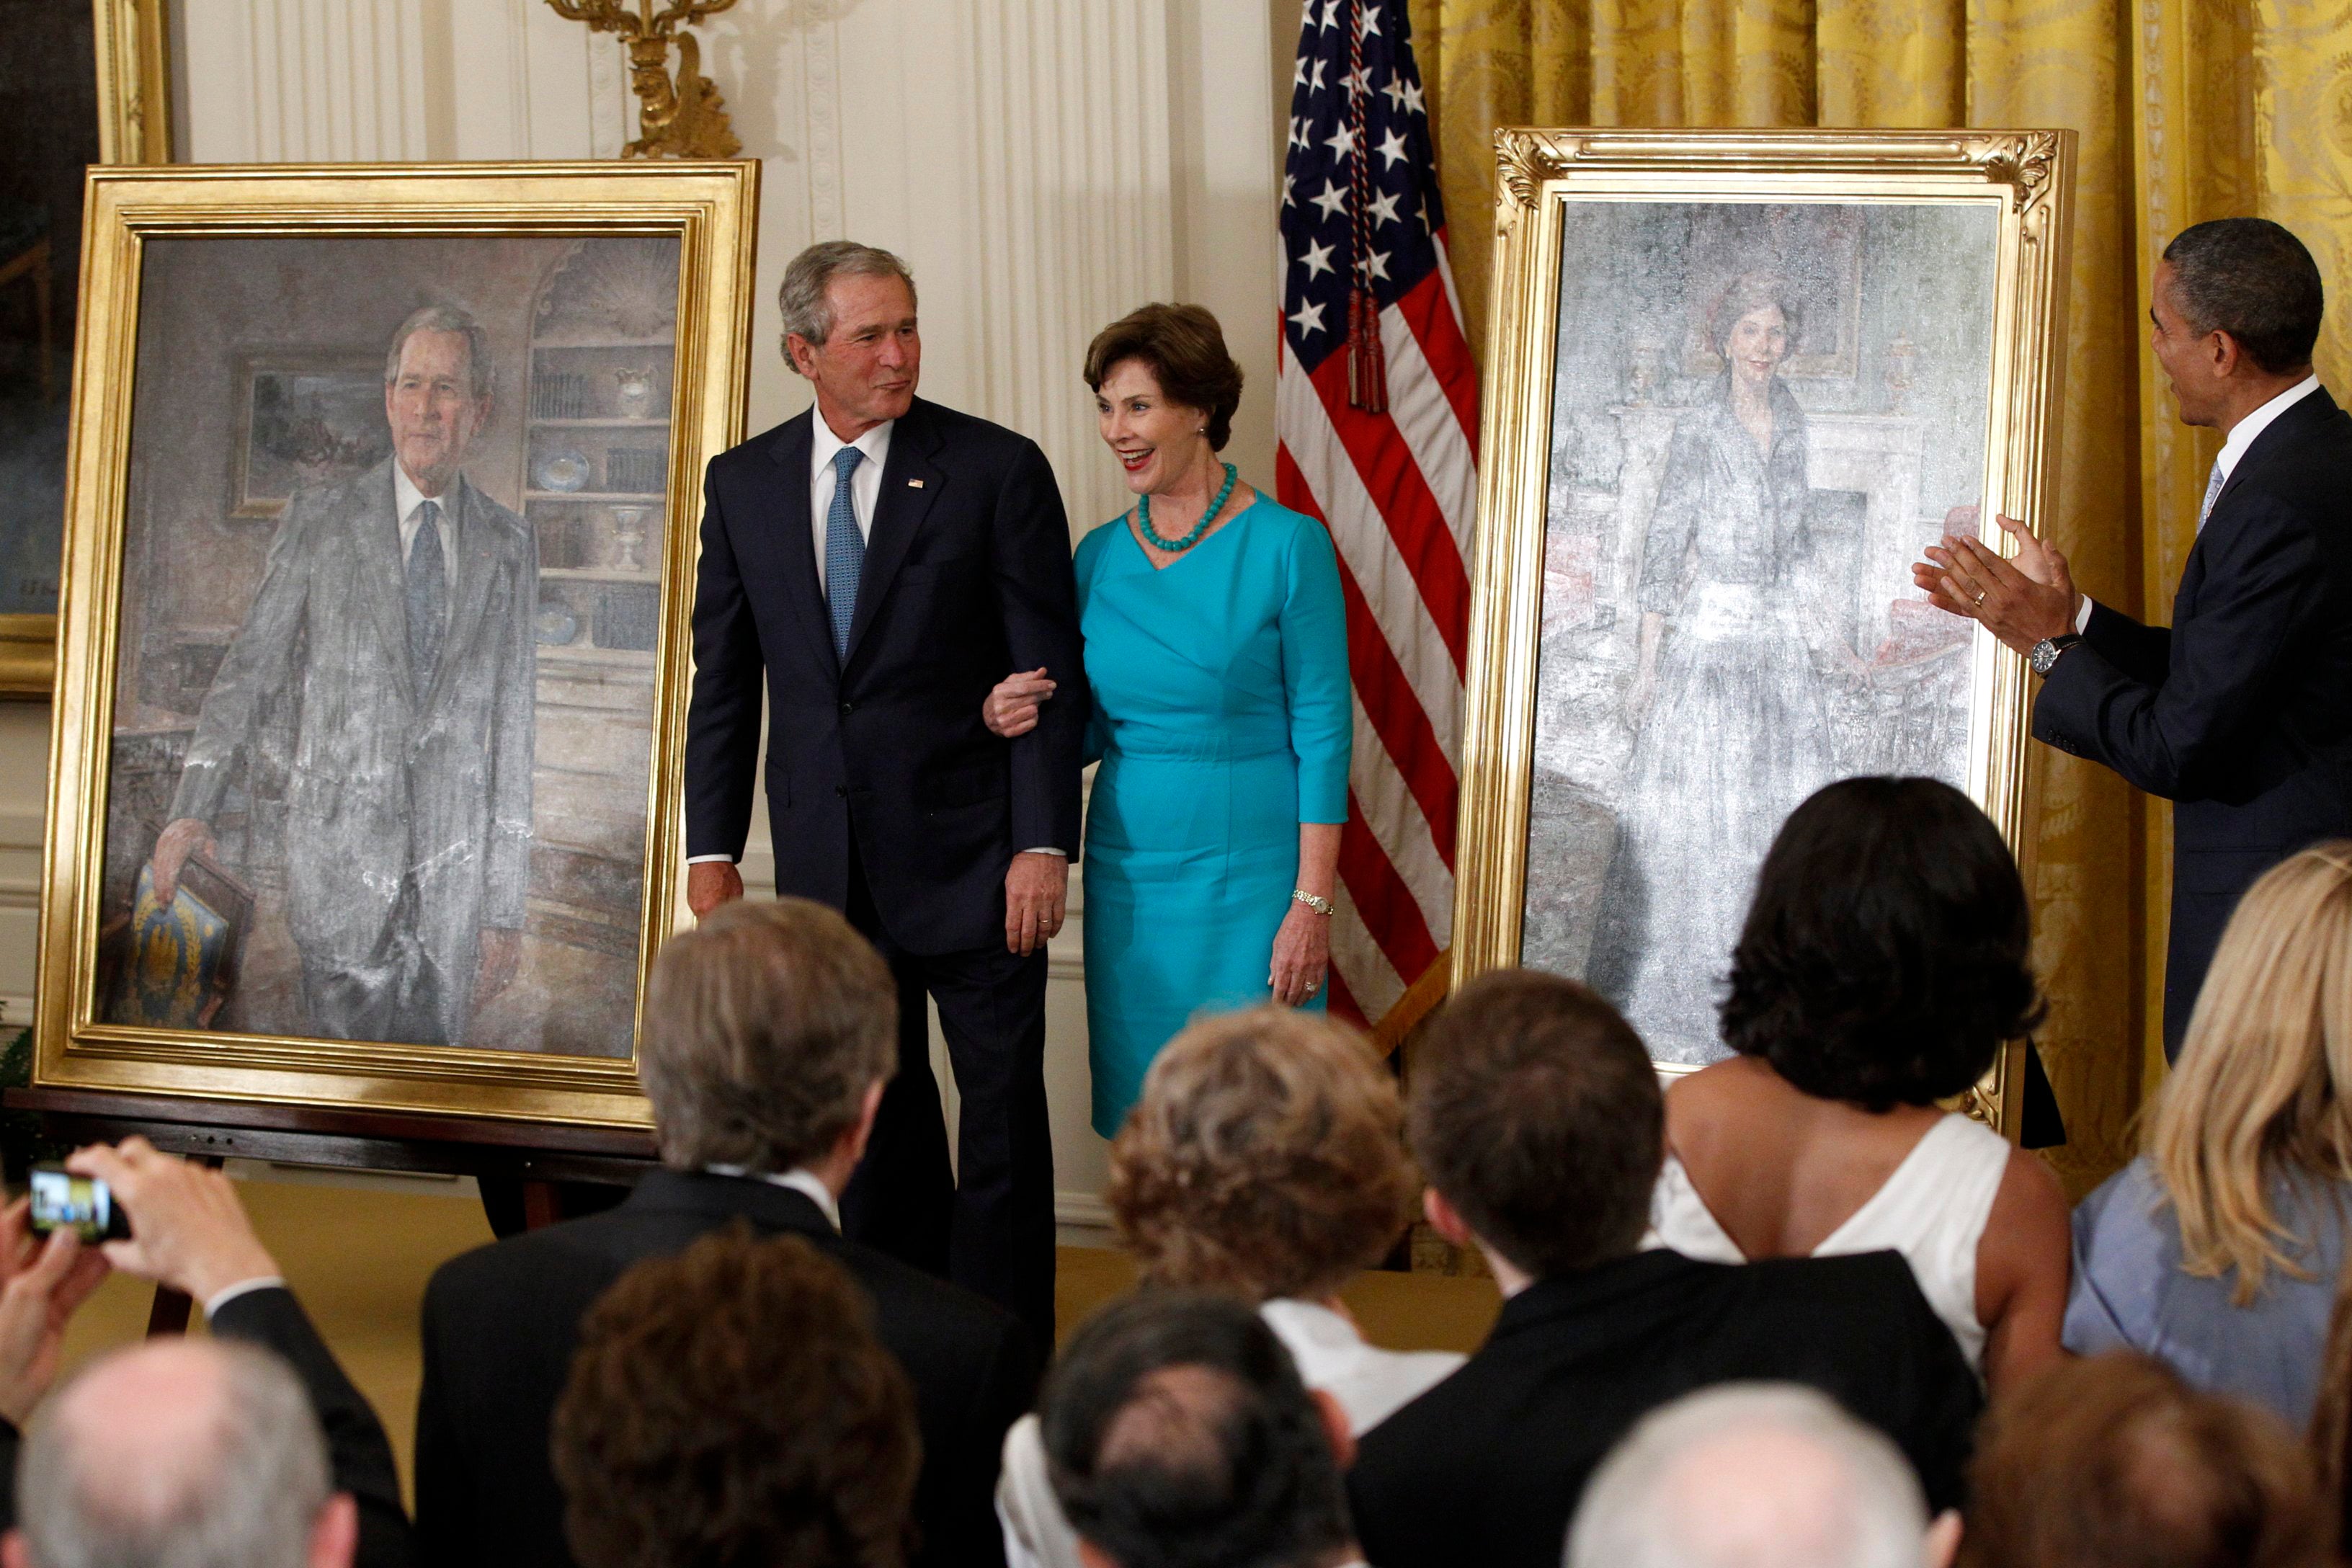 Barack Obama applauds as George W Bush and his wife Laura see their portraits added to the White House collection on 31 May 2012